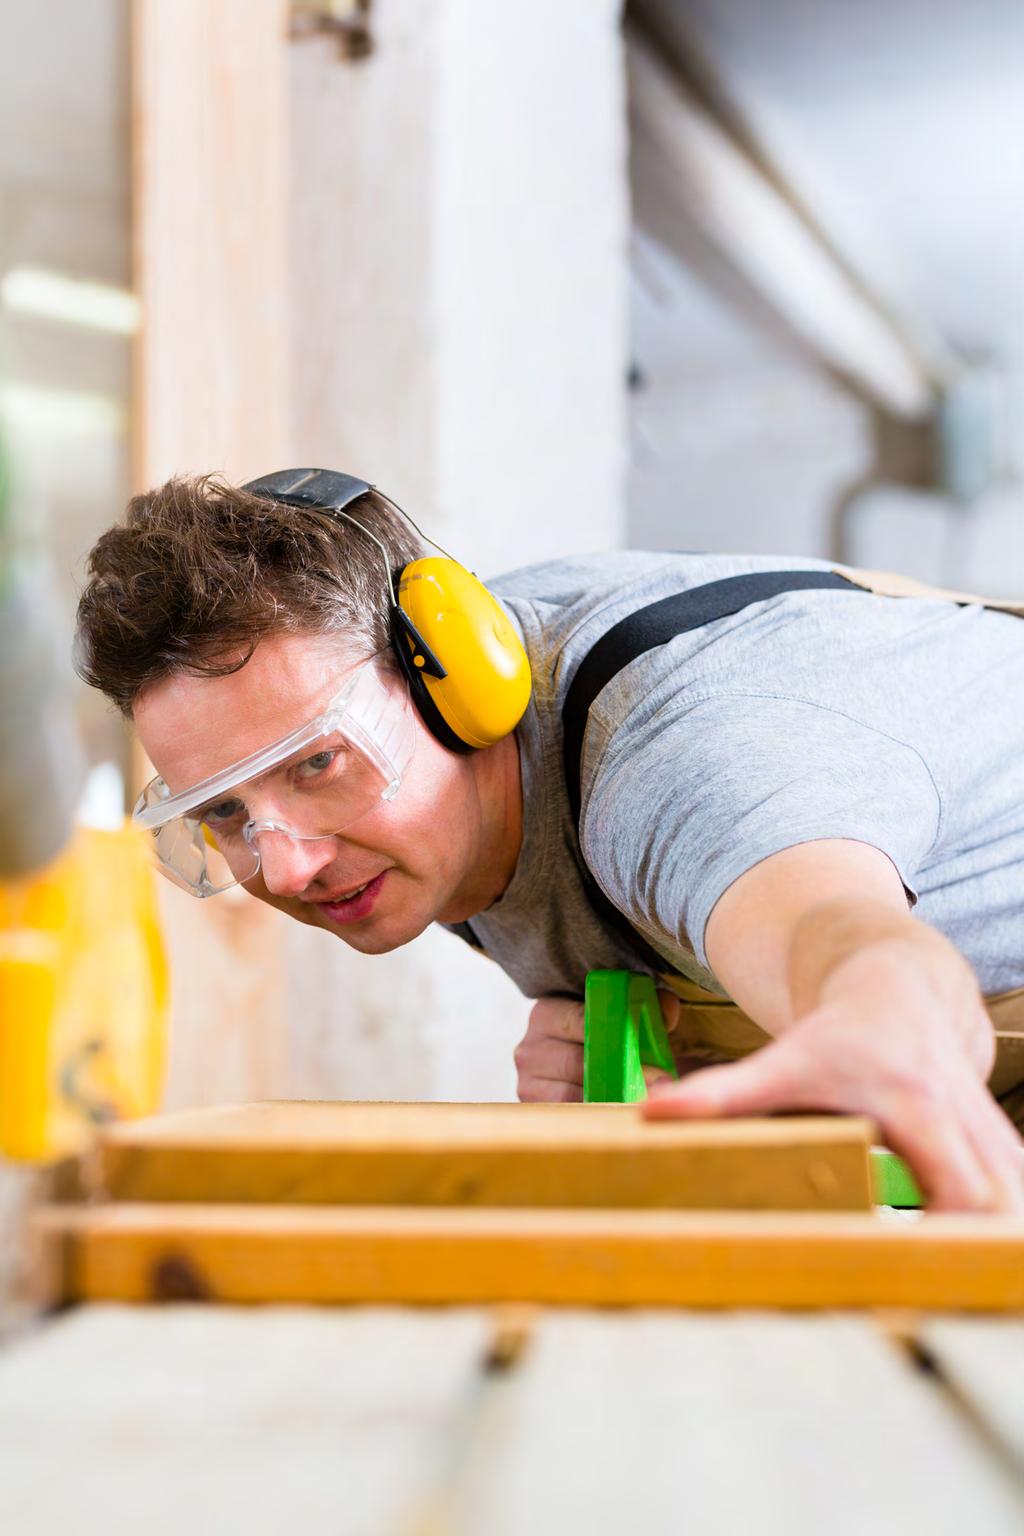 Hearing Protection Basic OSHA's hearing conservation program is designed to protect workers with significant occupational noise exposures from hearing impairment even if they are subject to such